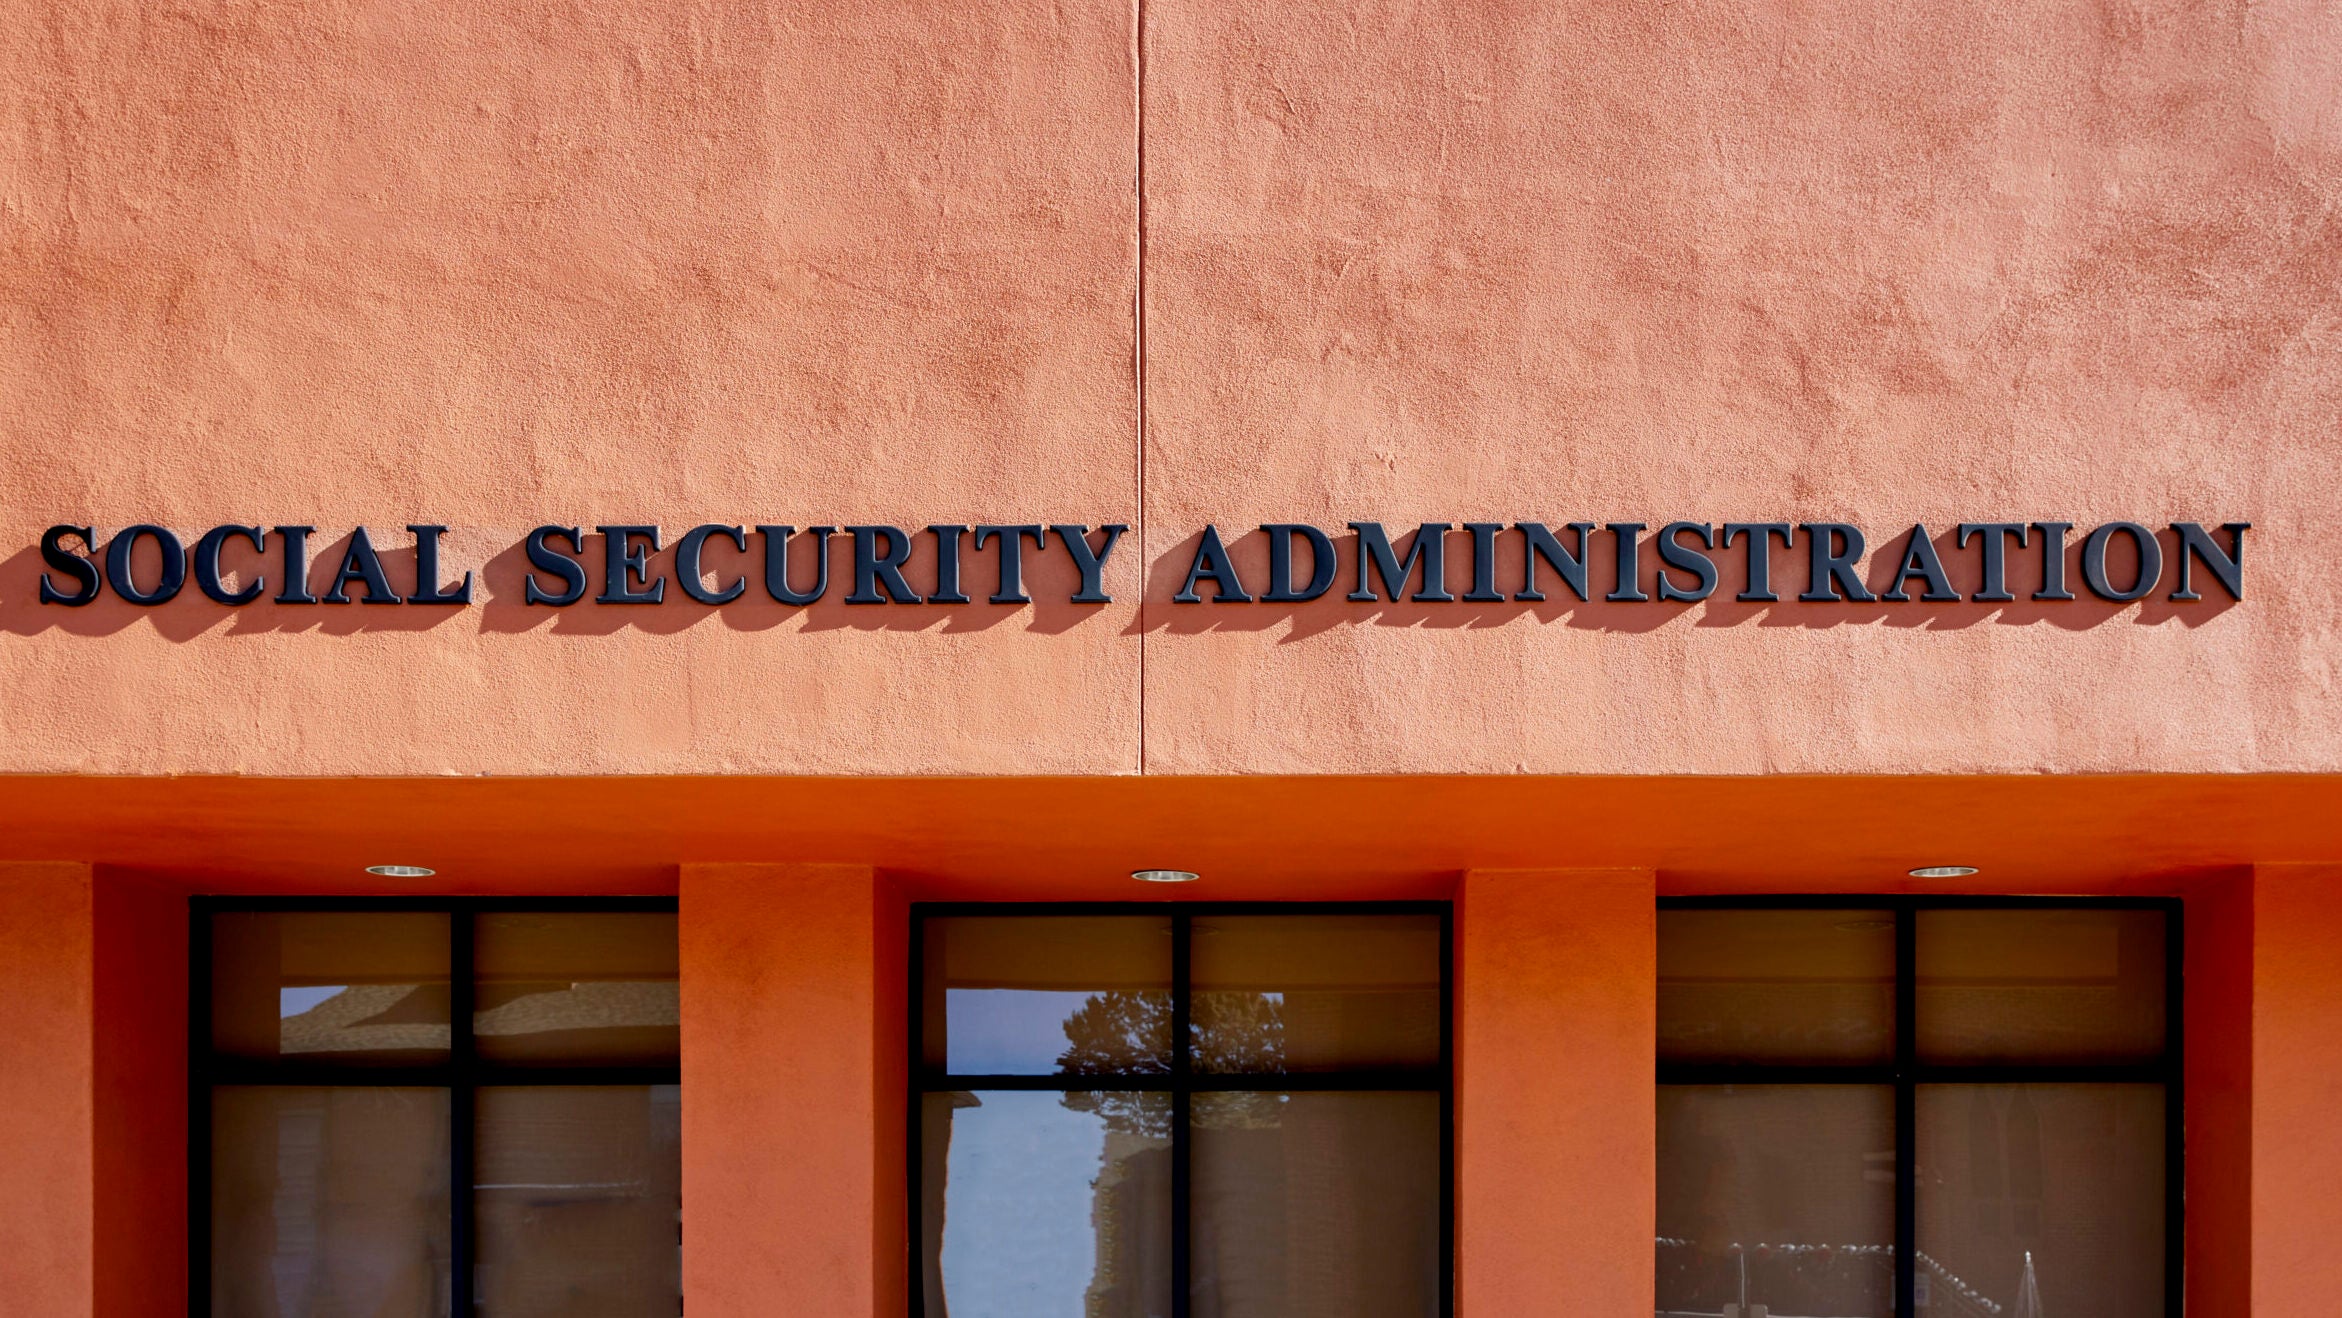 The $600 Social Security Bonus Was Just Misinformation, As the SSA Debunked Rumored Claims